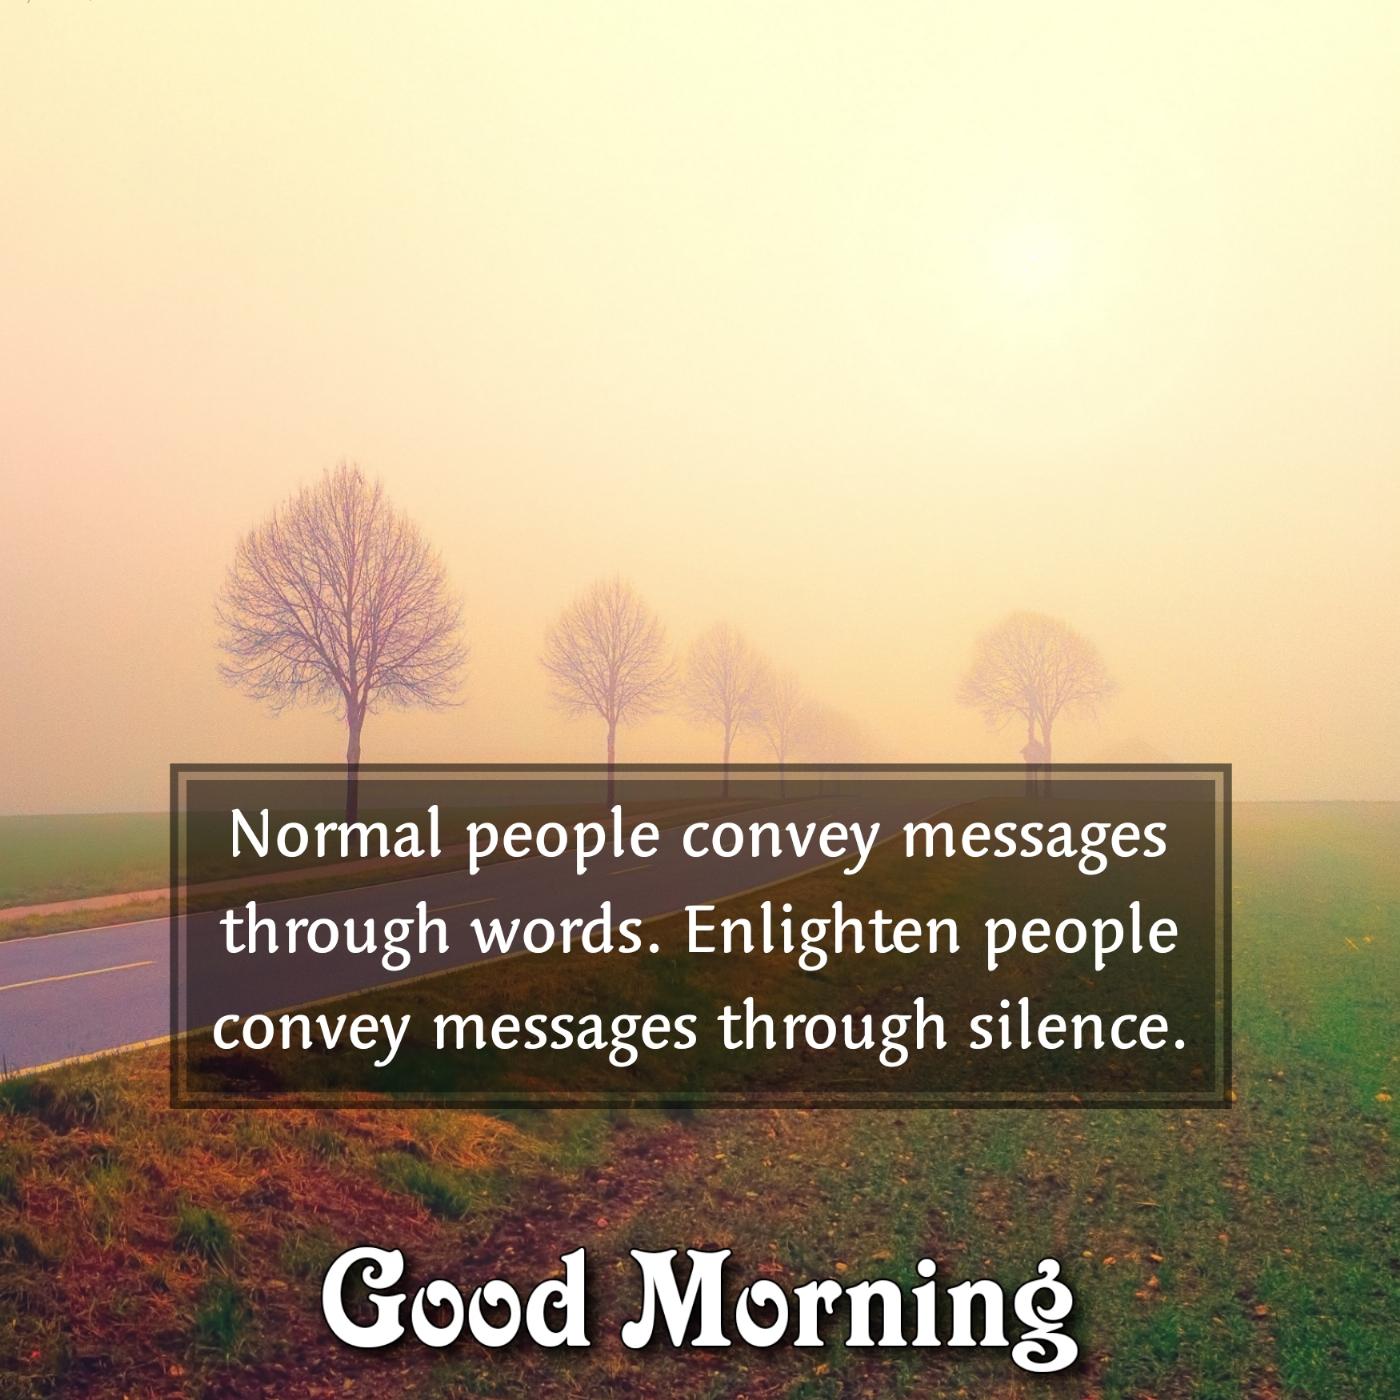 Normal people convey messages through words